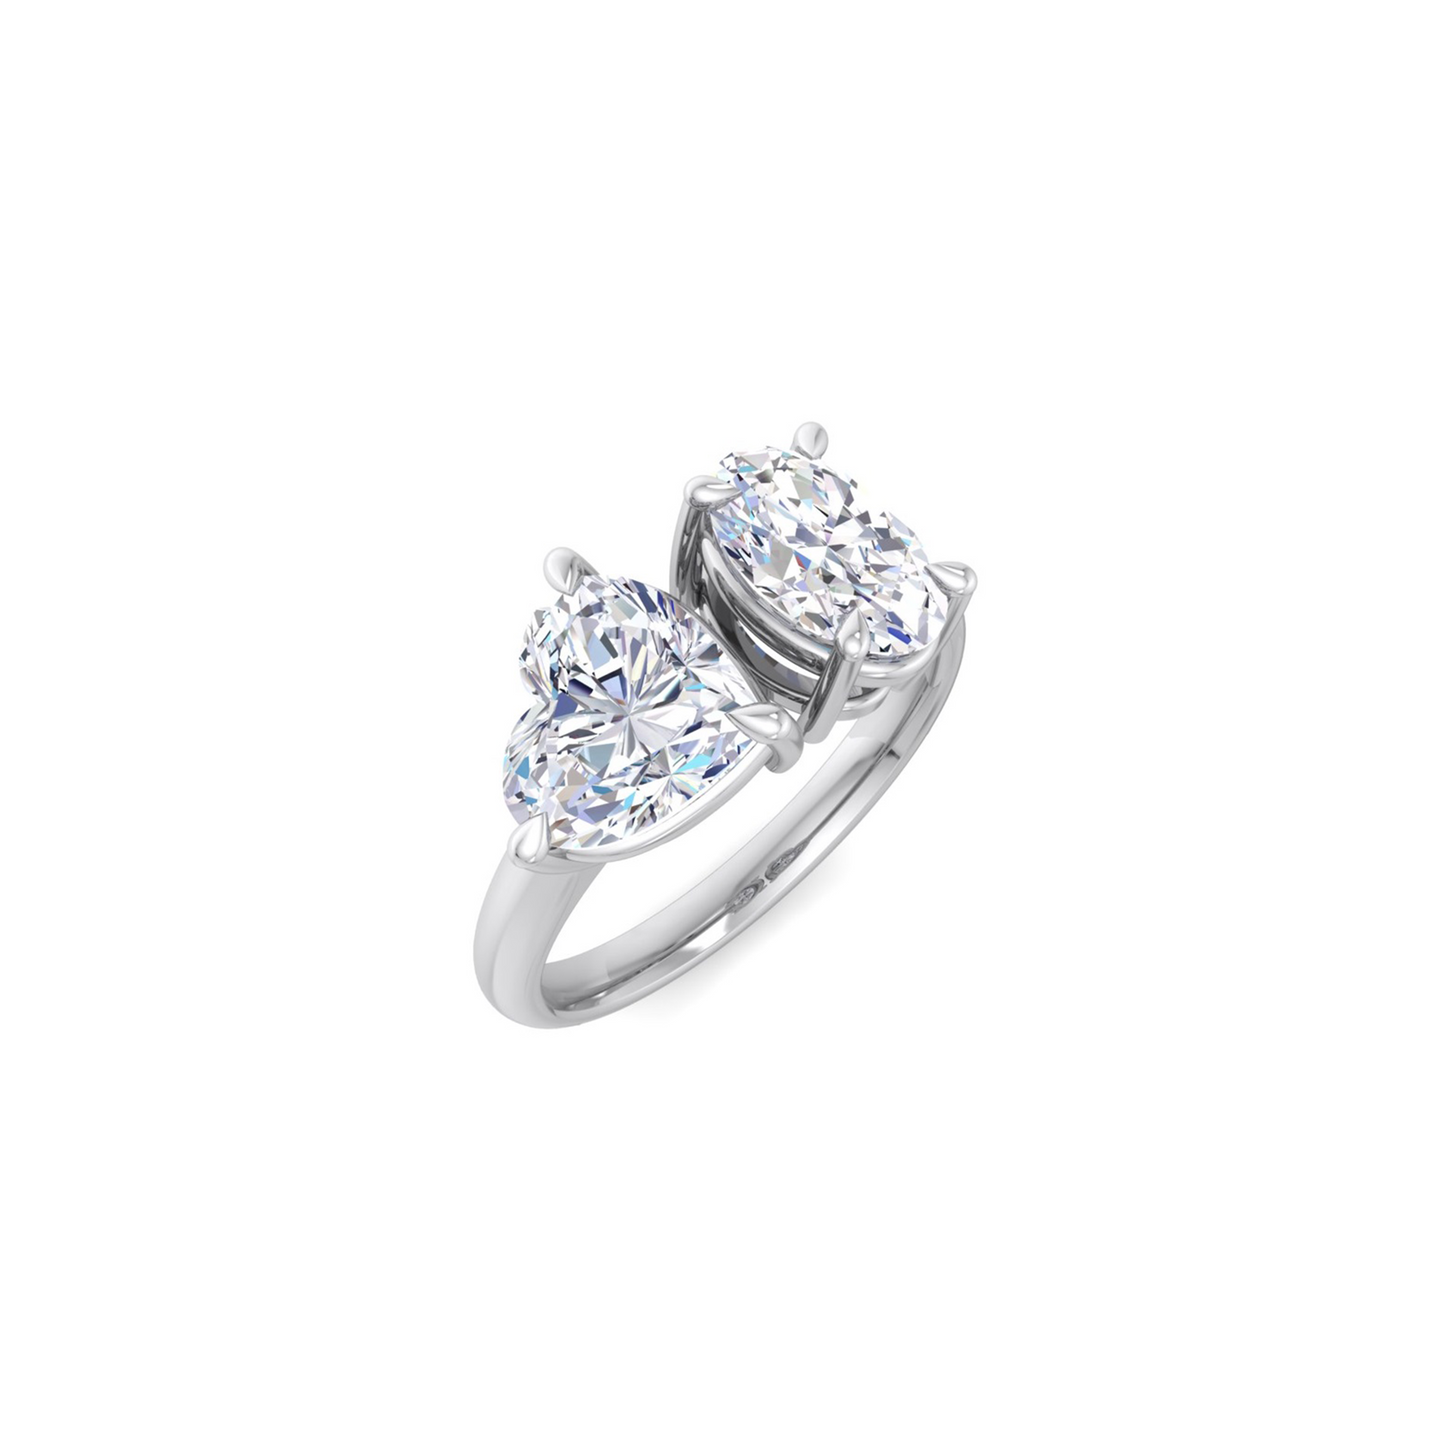 Heartfelt Radiance: Exquisite Mix of Oval and Heart Shapes in Lab Grown Diamond Ring